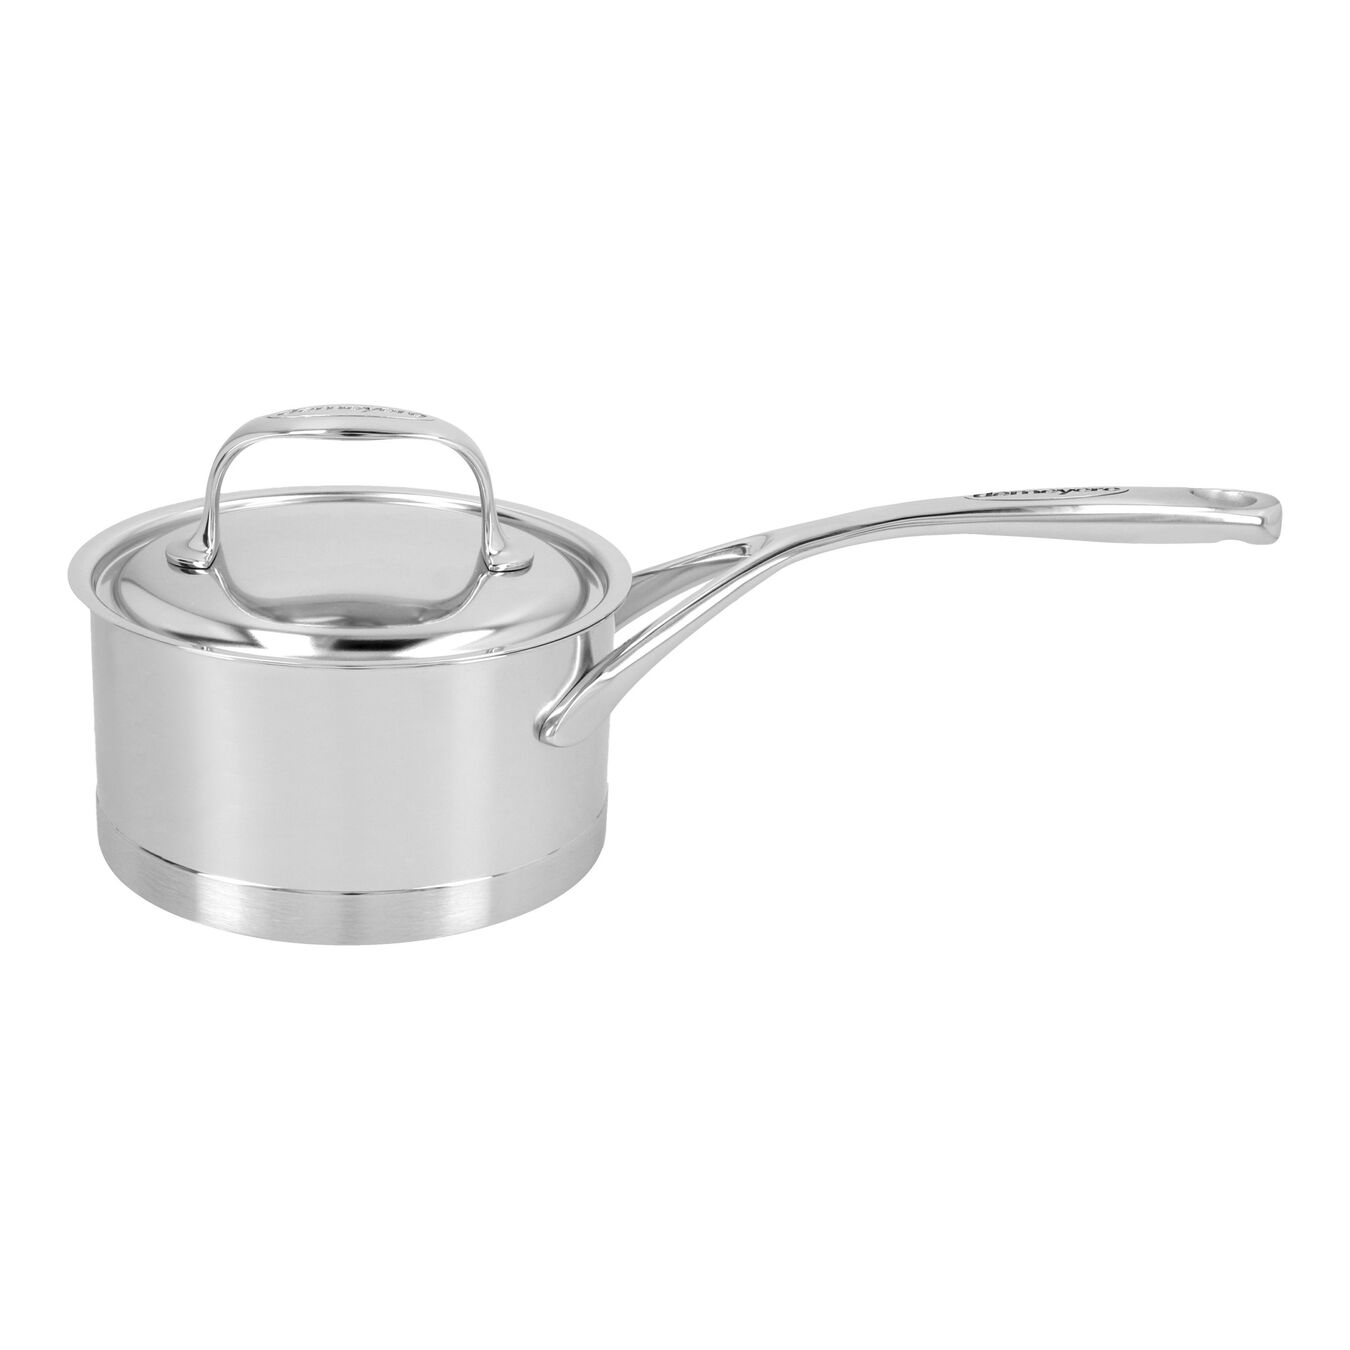 14 cm 18/10 Stainless Steel Saucepan with lid silver,,large 1